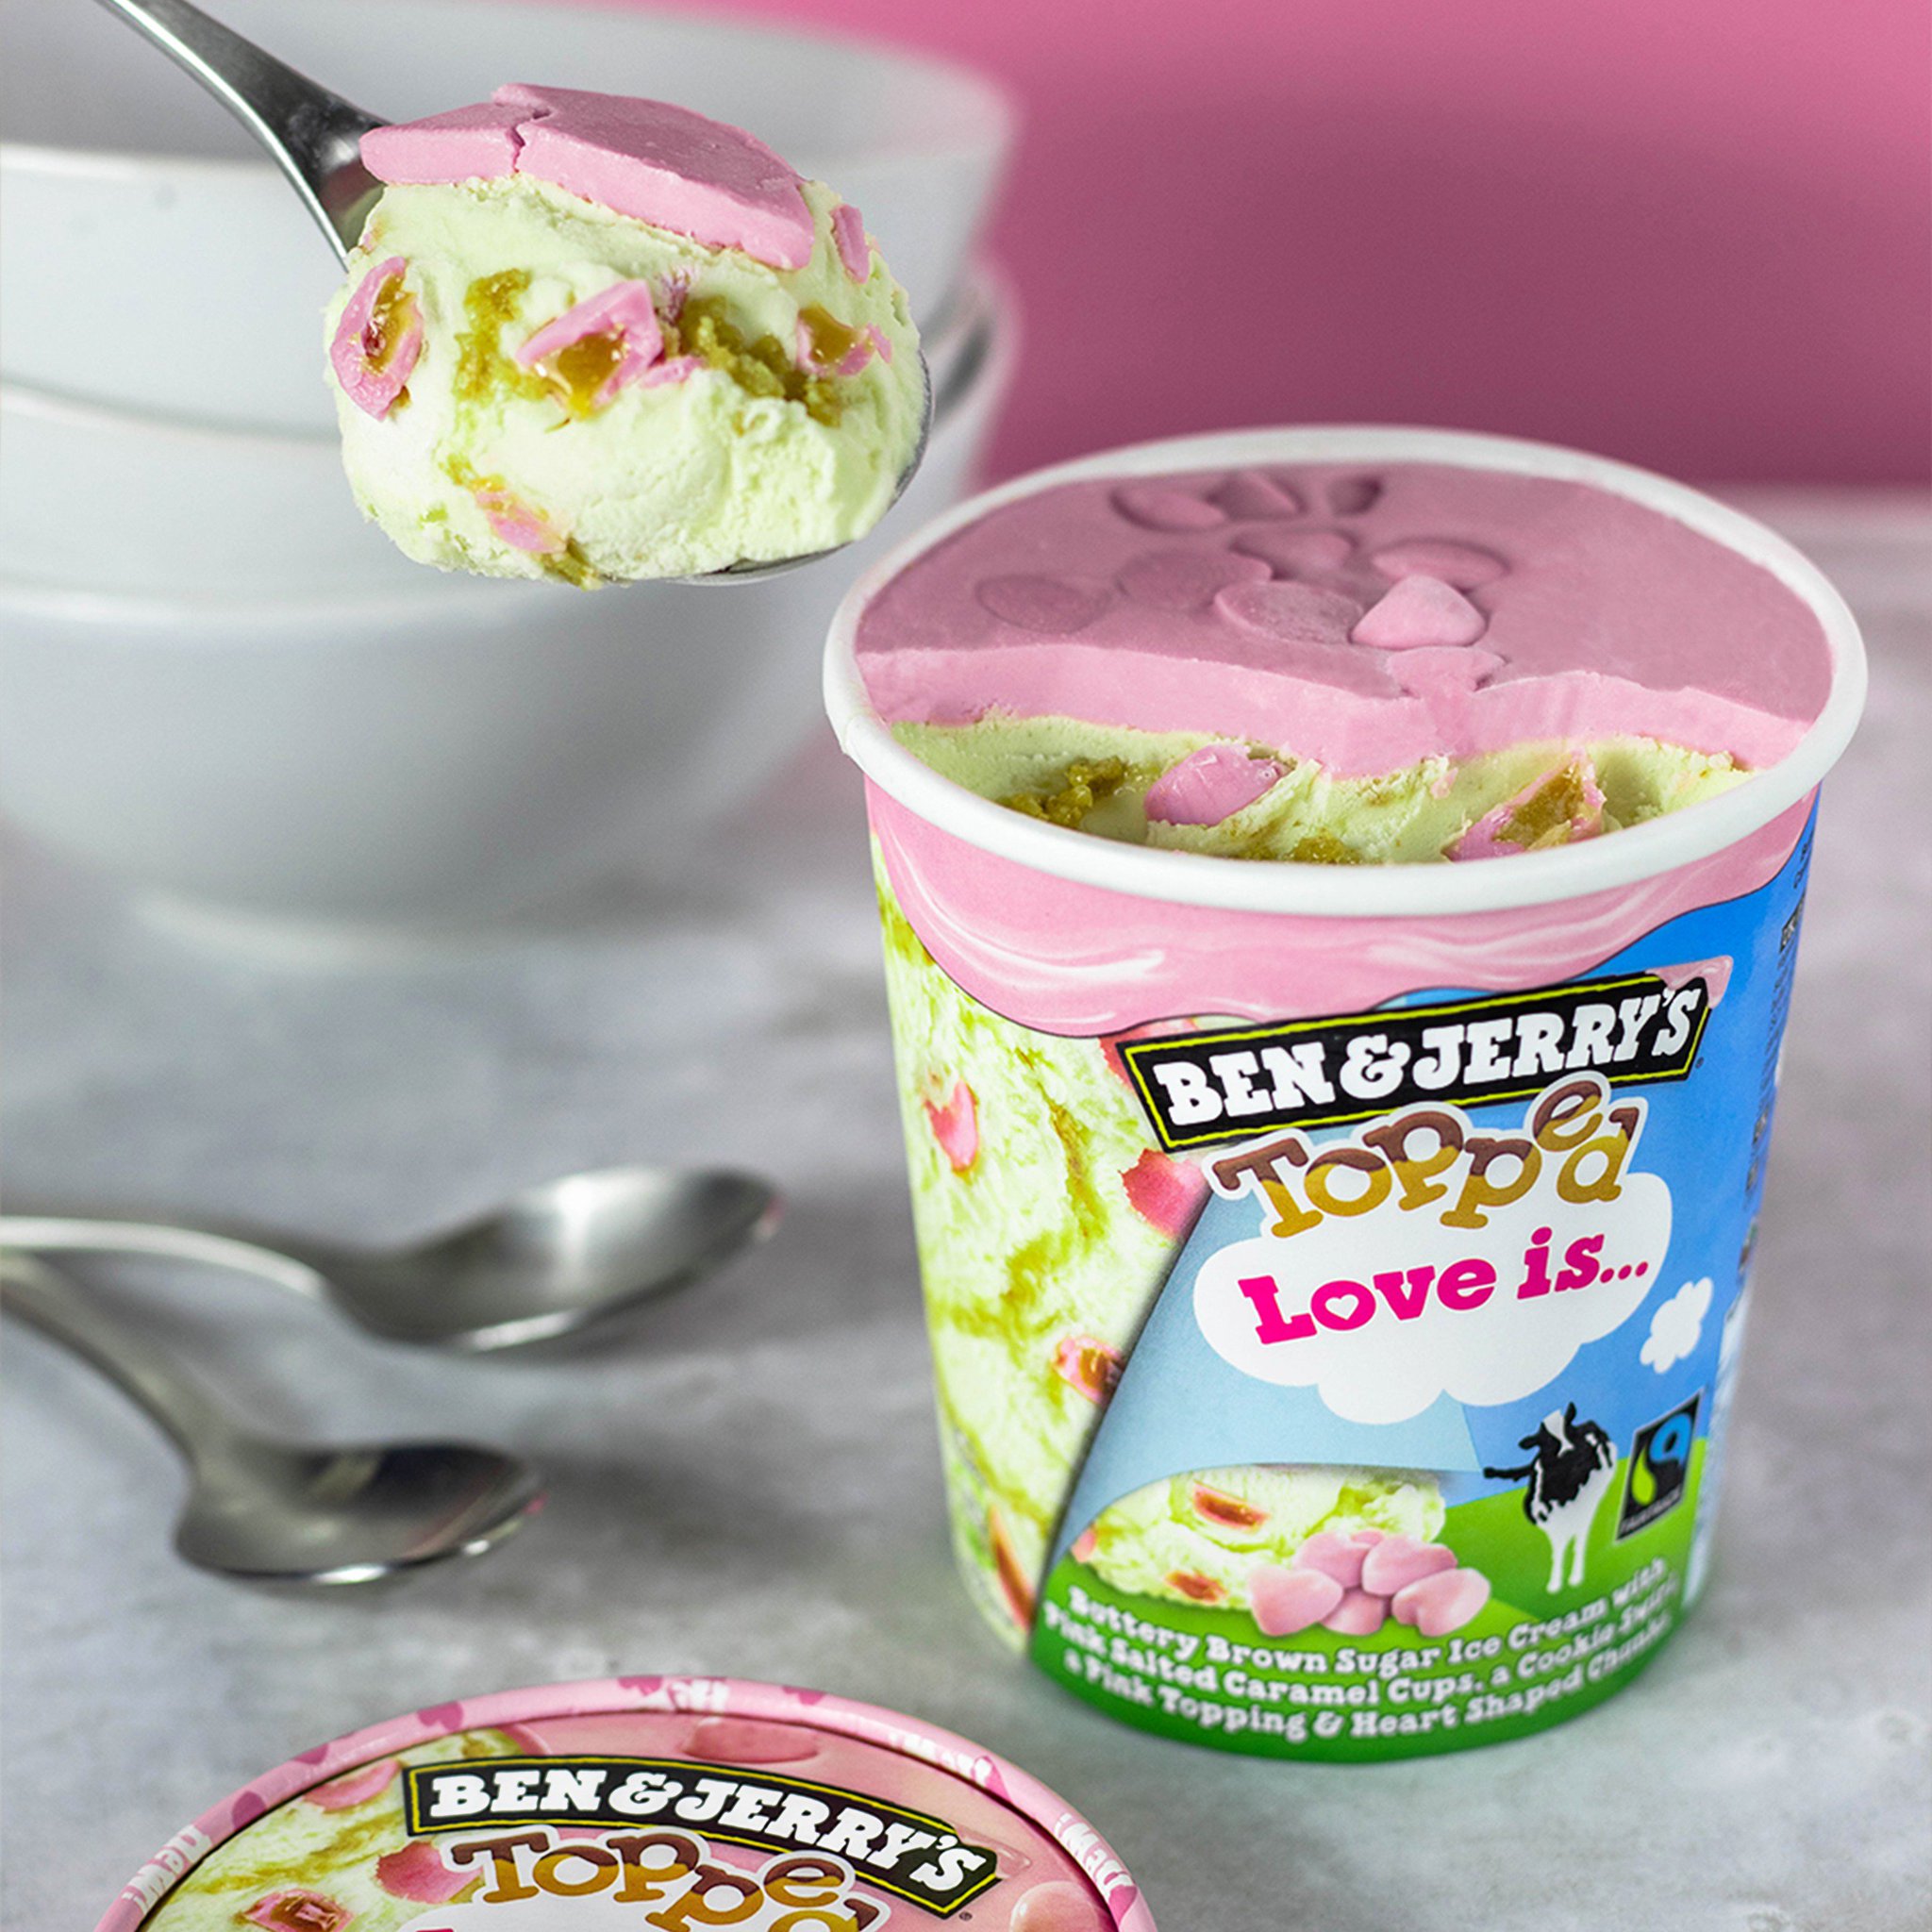 & Jerry's UK 🧡 on Twitter: "Introducing NEW Topped Love Is... buttery brown sugar ice cream, off with pink chocolatey hearts. We're tickled pink about this one! Hitting freezers in